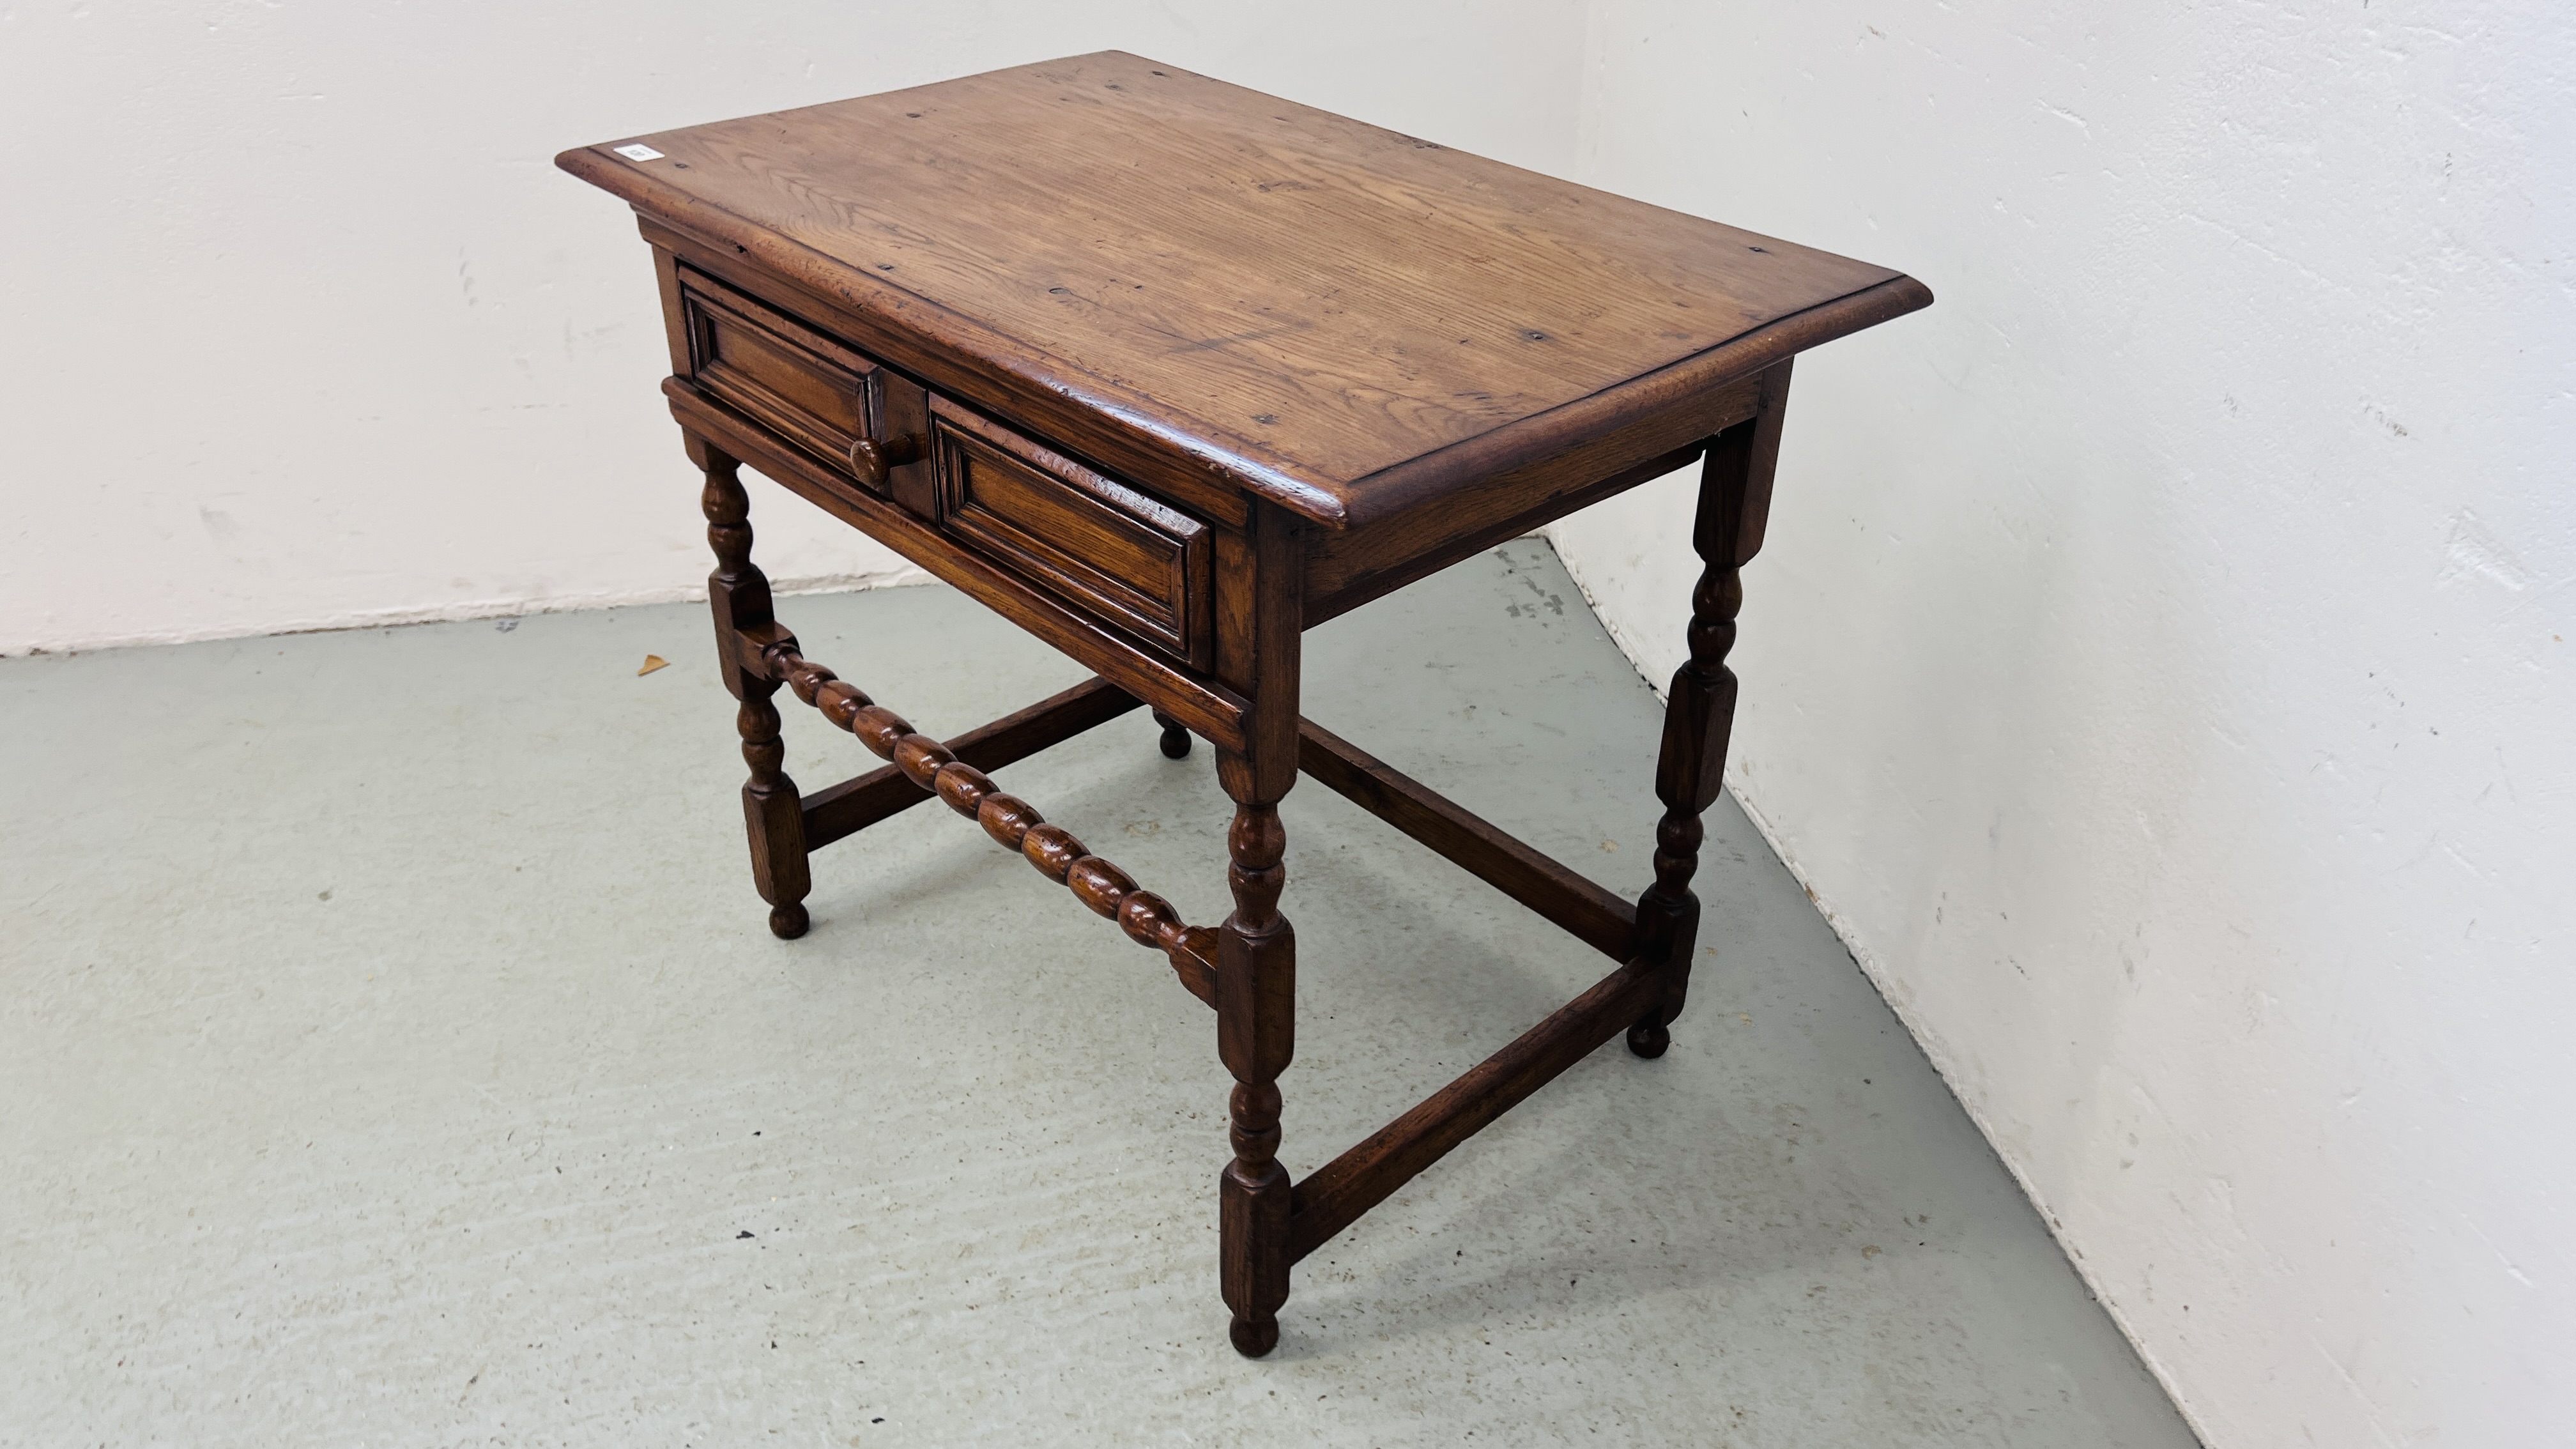 A GOOD QUALITY REPRODUCTION SOLID OAK SINGLE DRAWER SIDE TABLE WITH BOBBIN STRETCHER W 84CM, D 52CM, - Image 2 of 7